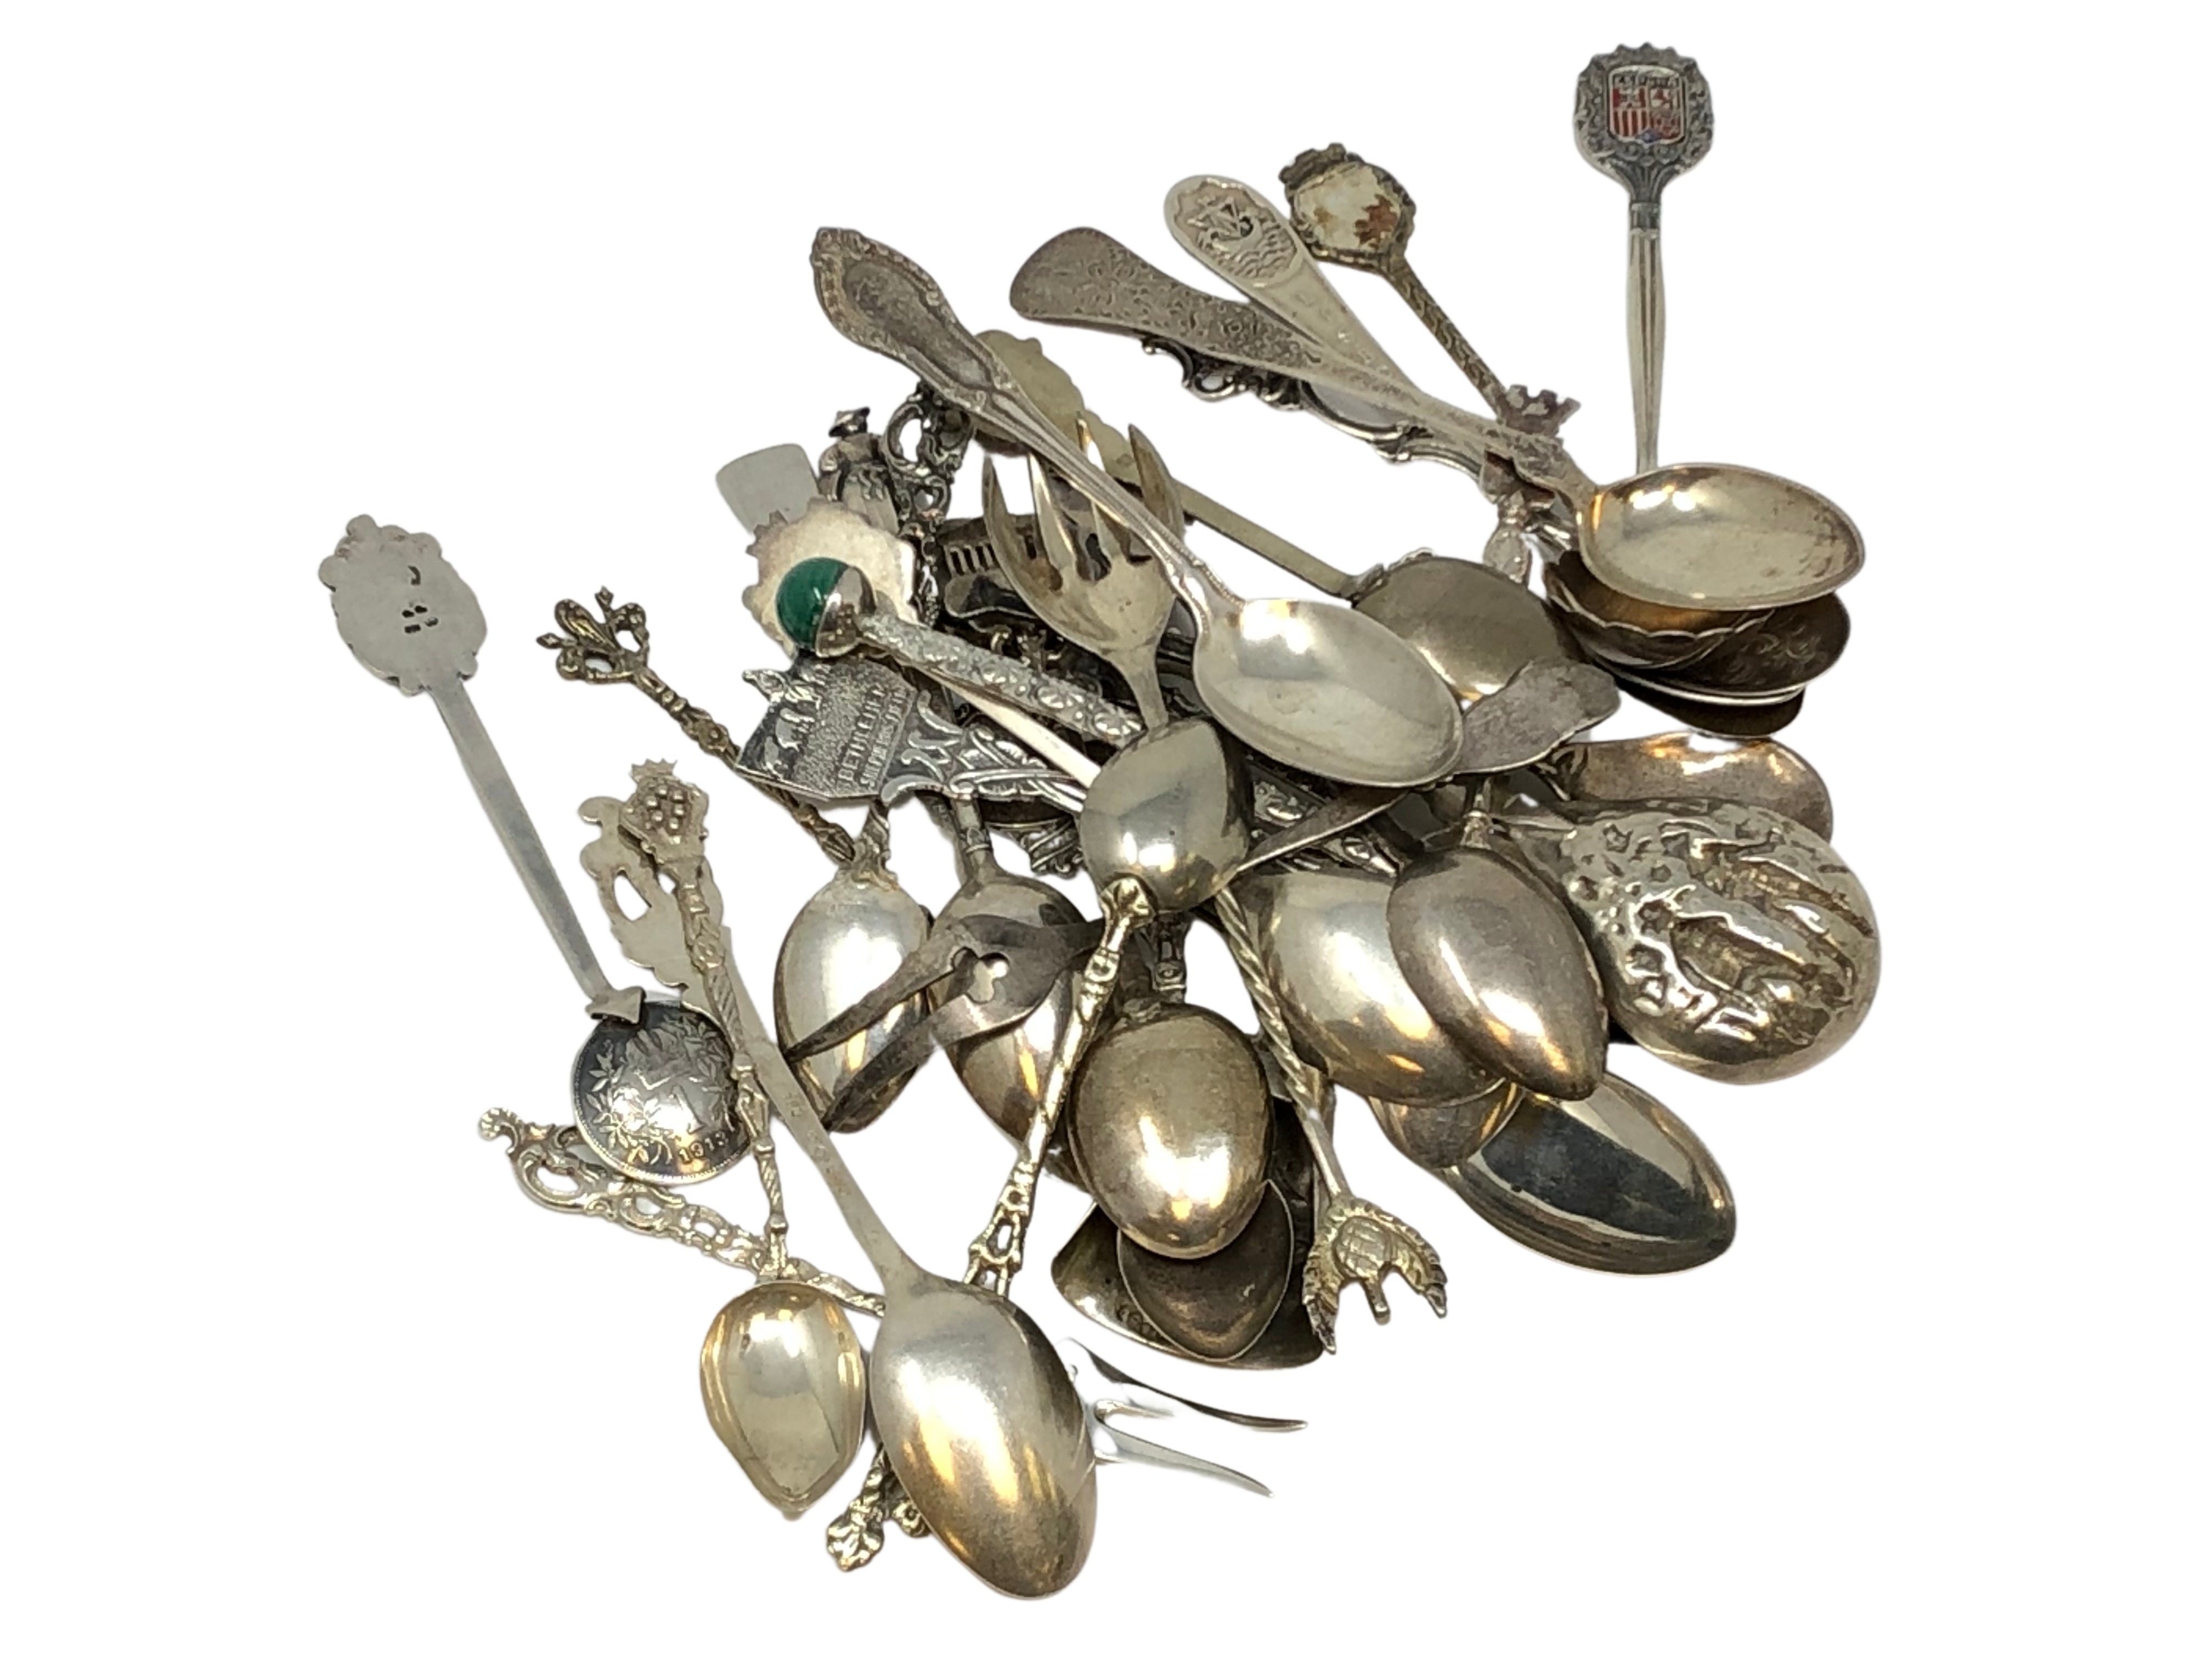 A collection of various items of silver cutlery